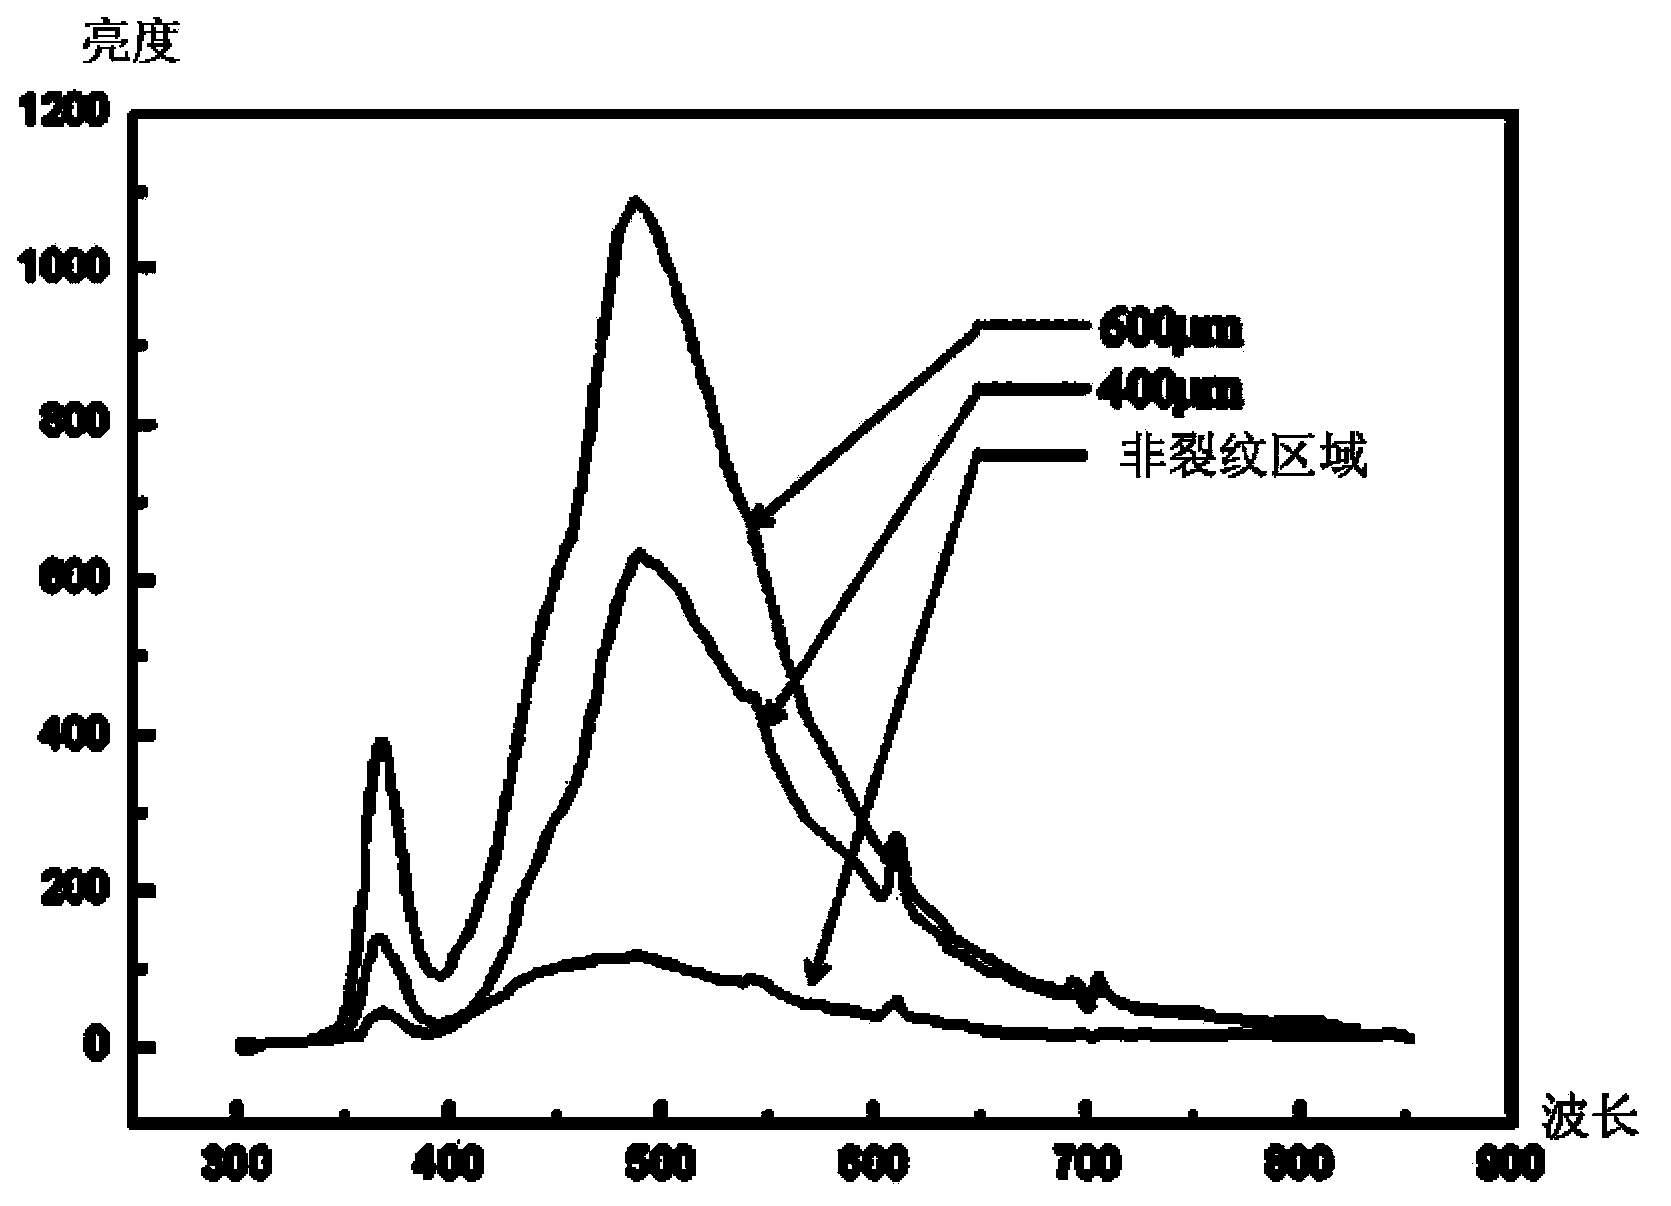 Method for detecting and monitoring cracks of mechanical parts by utilizing fluorescent quantum dots